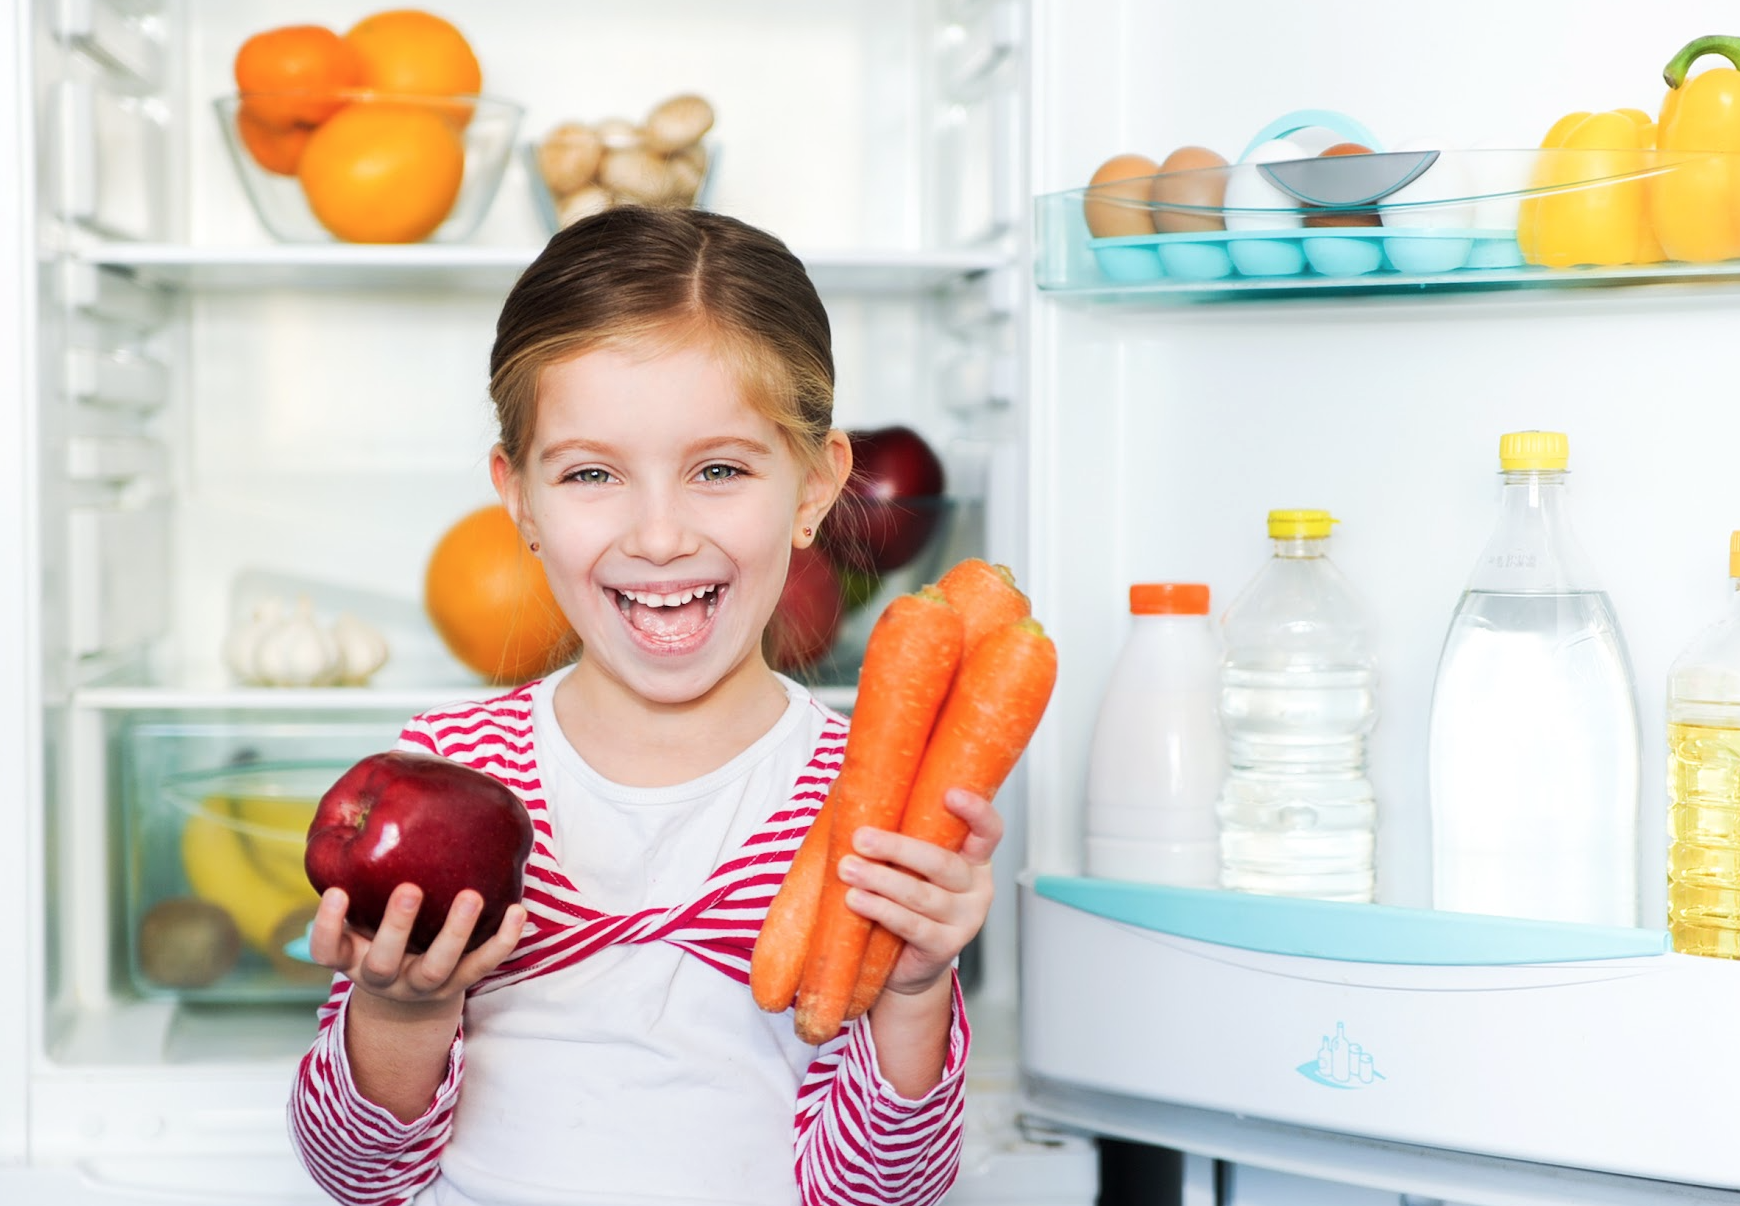 Learn how to develop healthy habits for kids and get your picky eater to eat healthier foods; from fruits to veggies! Get expert advice!